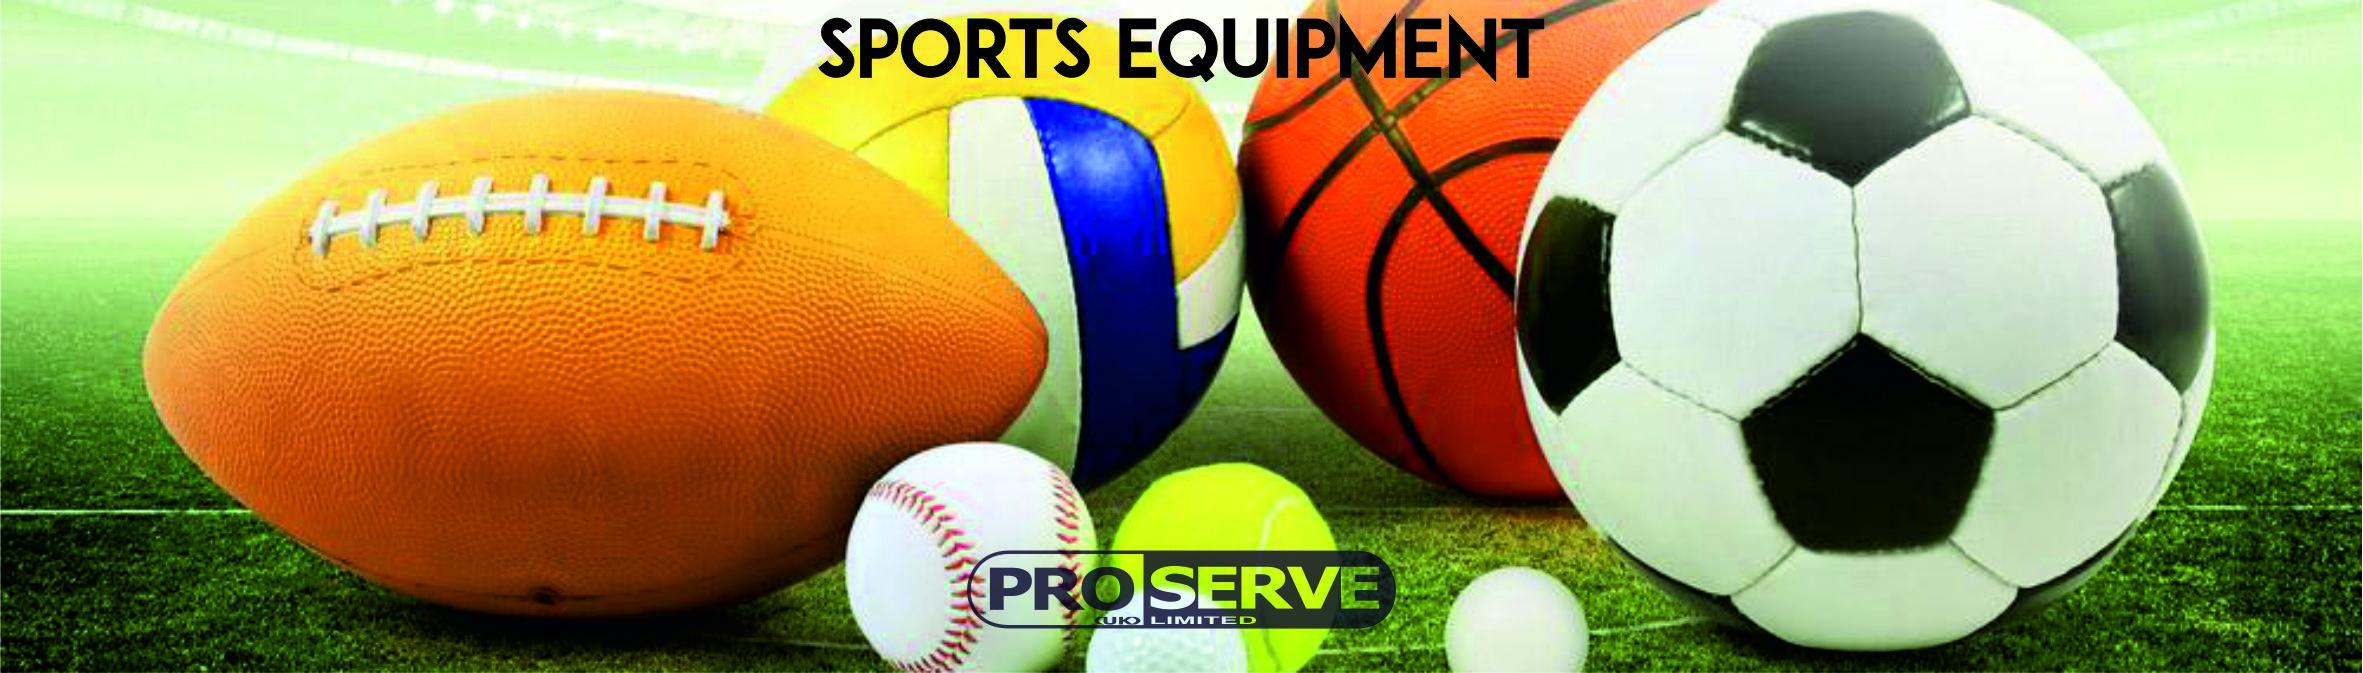 SPORTS EQUIPMENT PAGE CURRENTLY UNDER CONSTRUCTION Please phone 01395 222975 if you require current prices or a quote